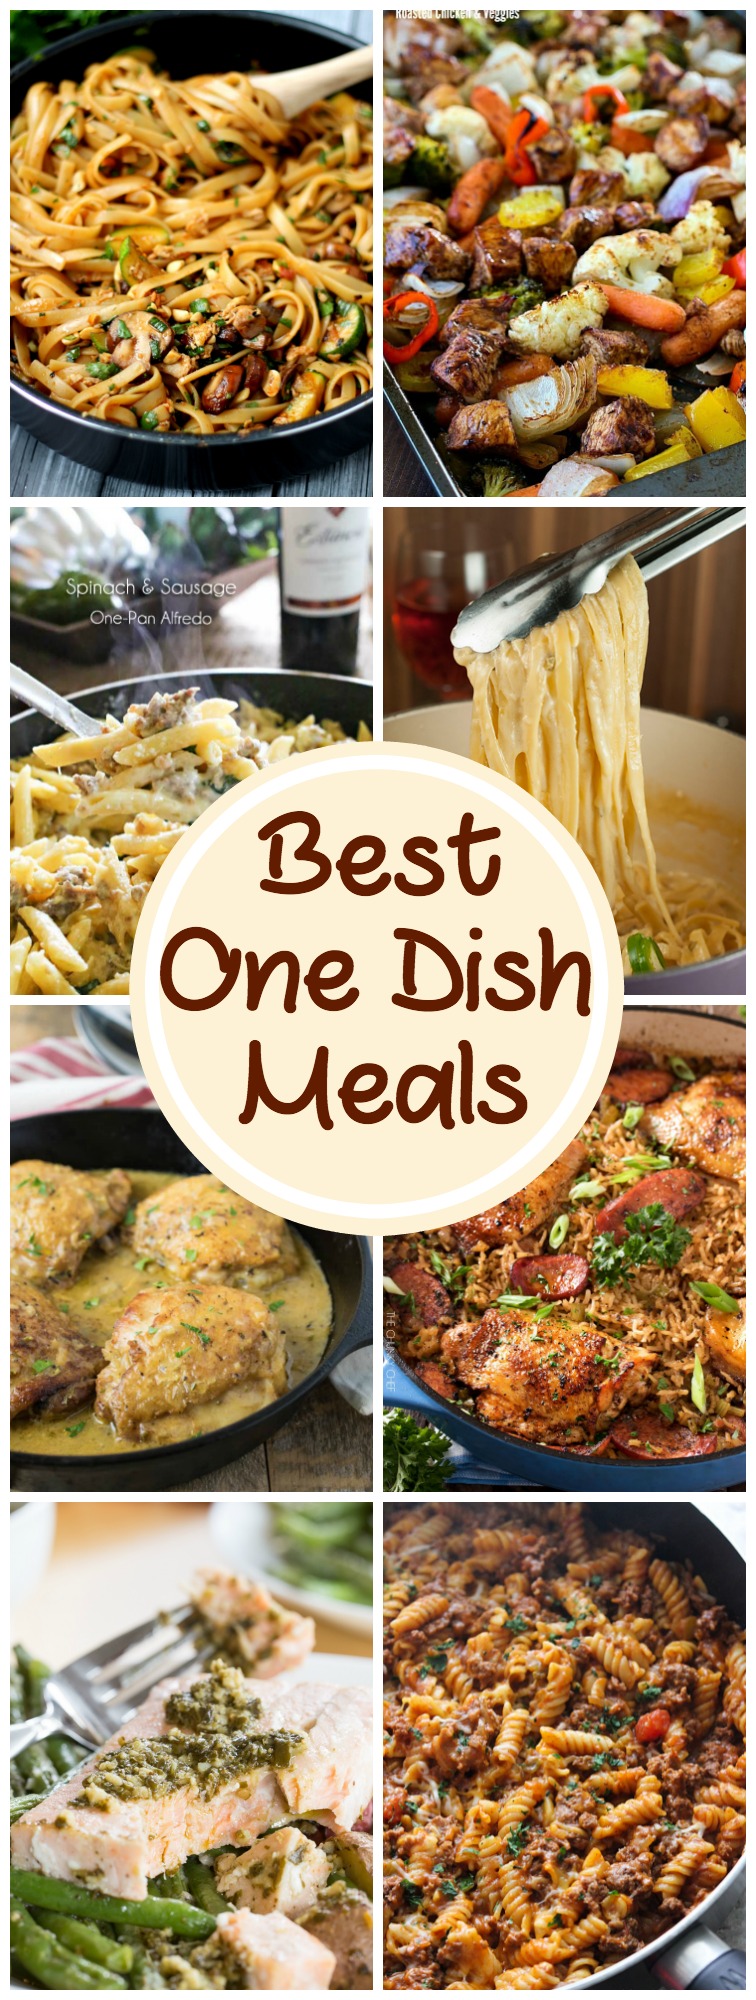 The Best One Dish Meals